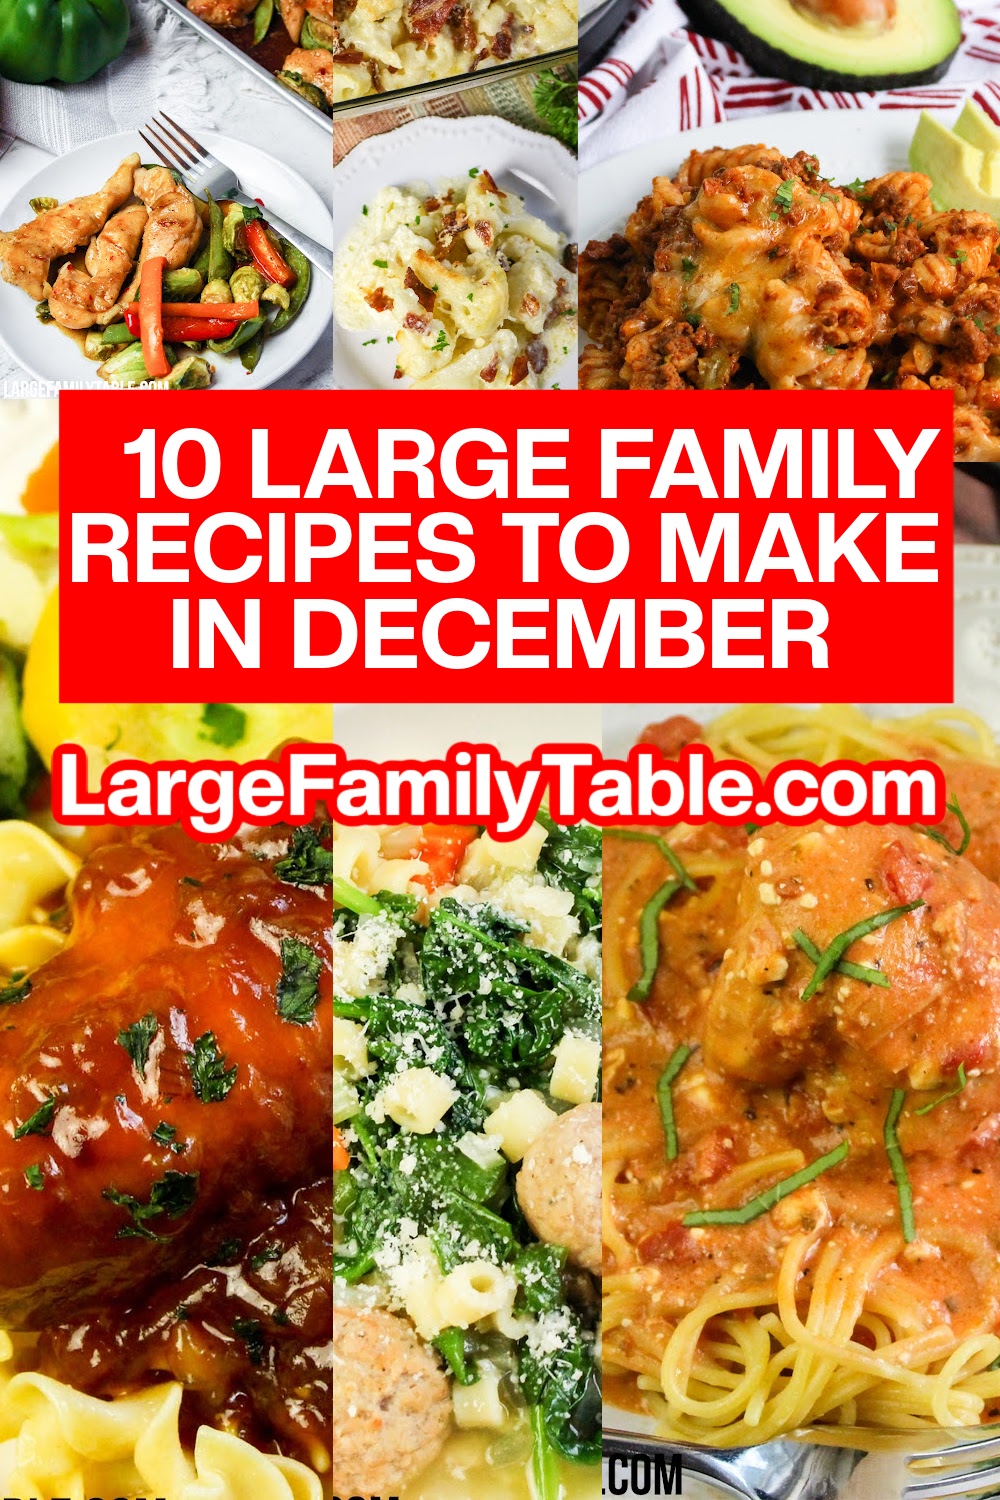 10 Large Family Recipes to Make in December